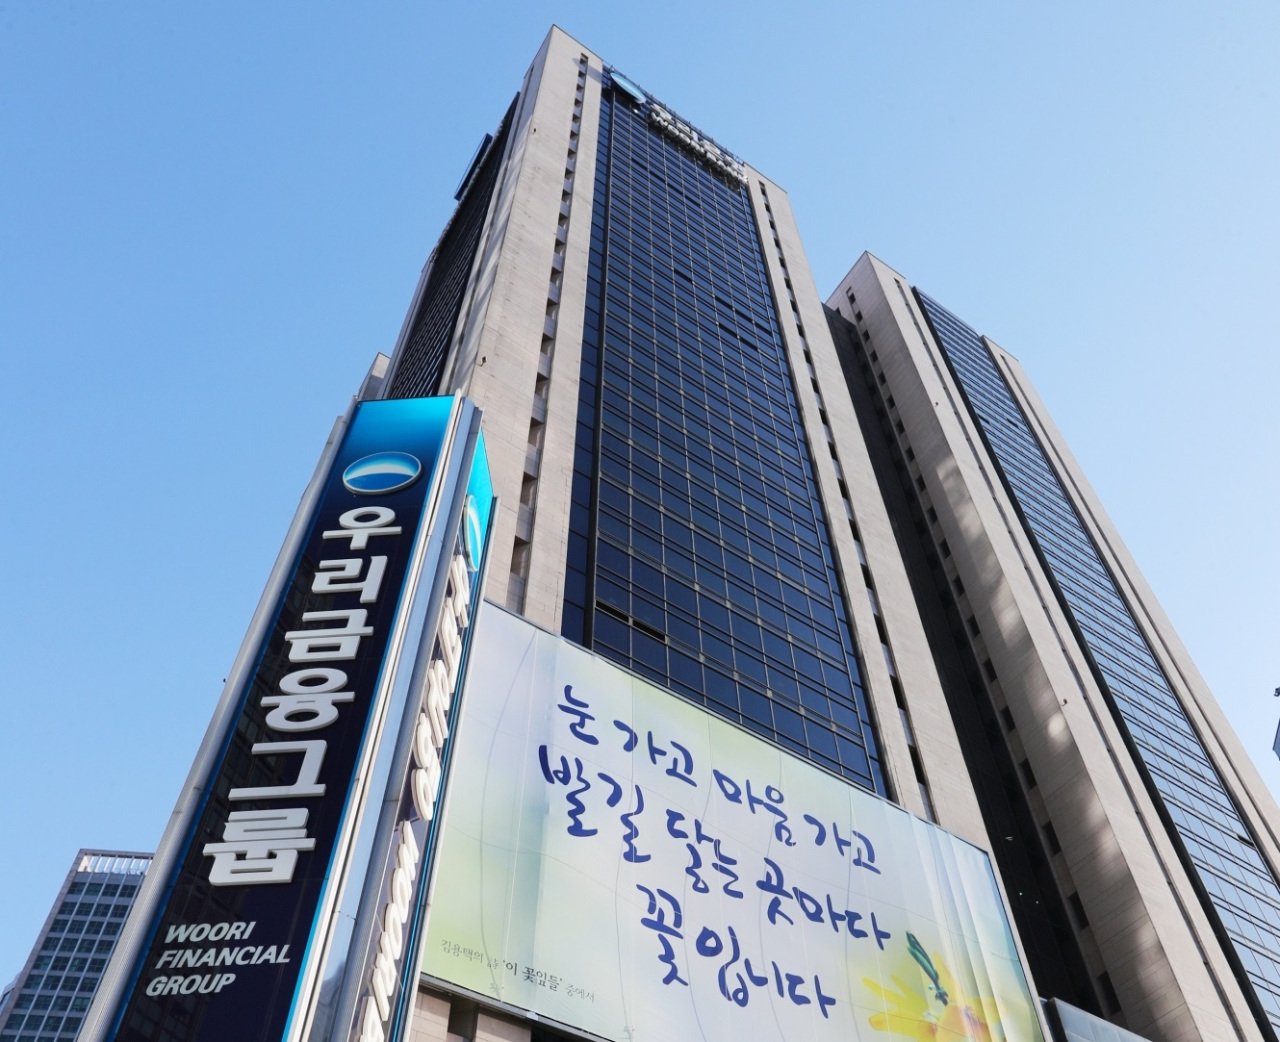 Woori Financial Group headquarters in central Seoul (Woori Financial Group)